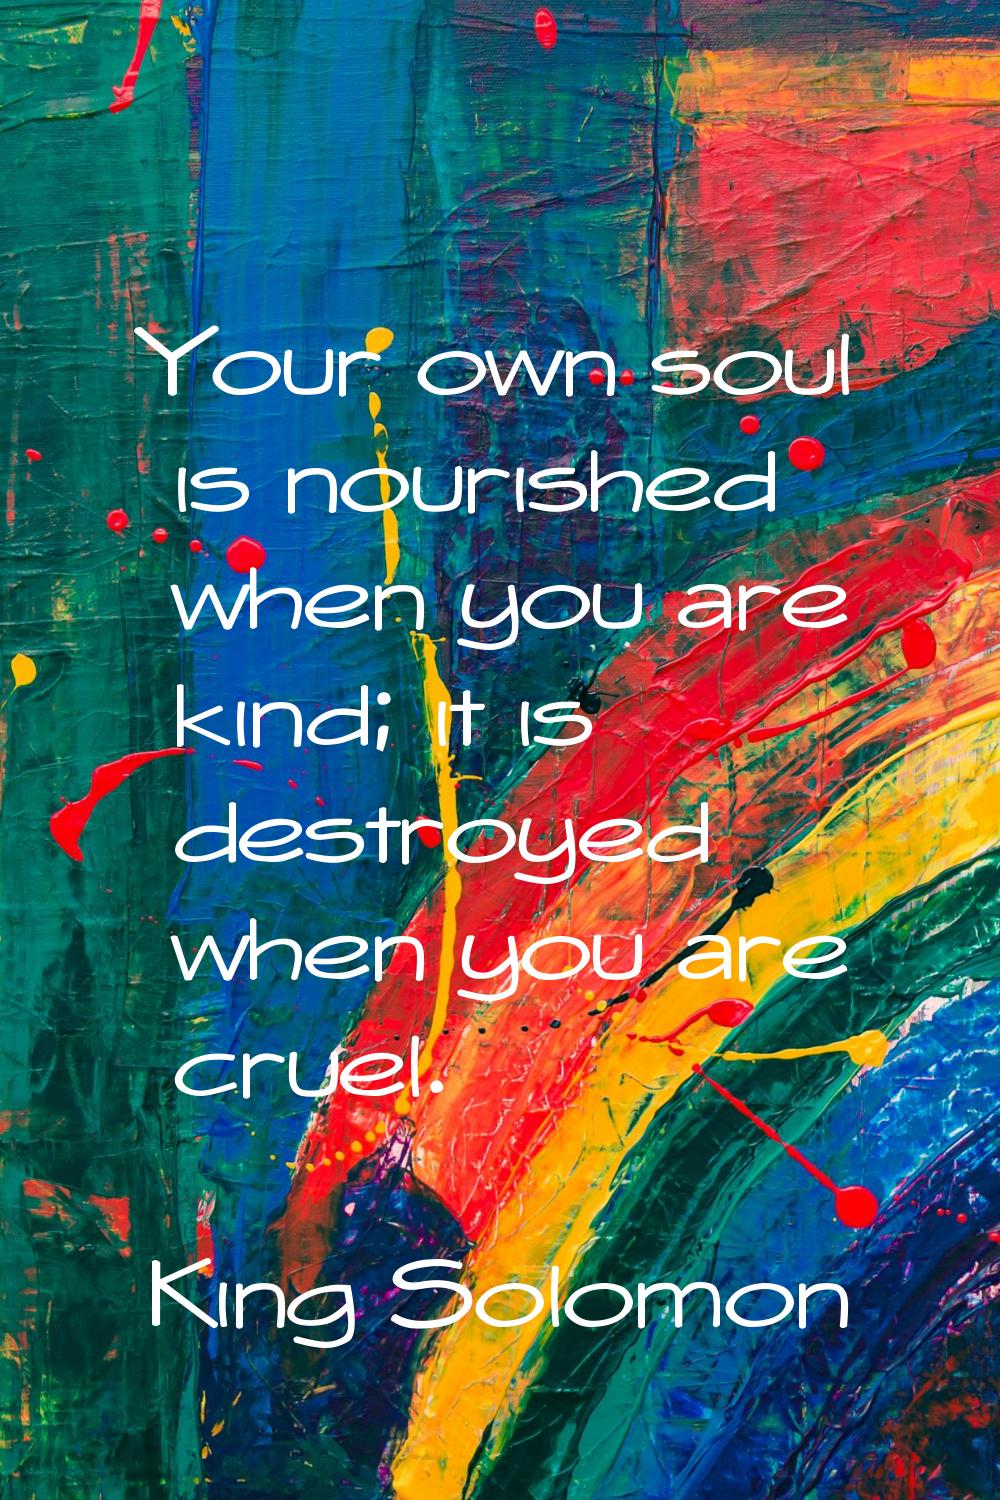 Your own soul is nourished when you are kind; it is destroyed when you are cruel.